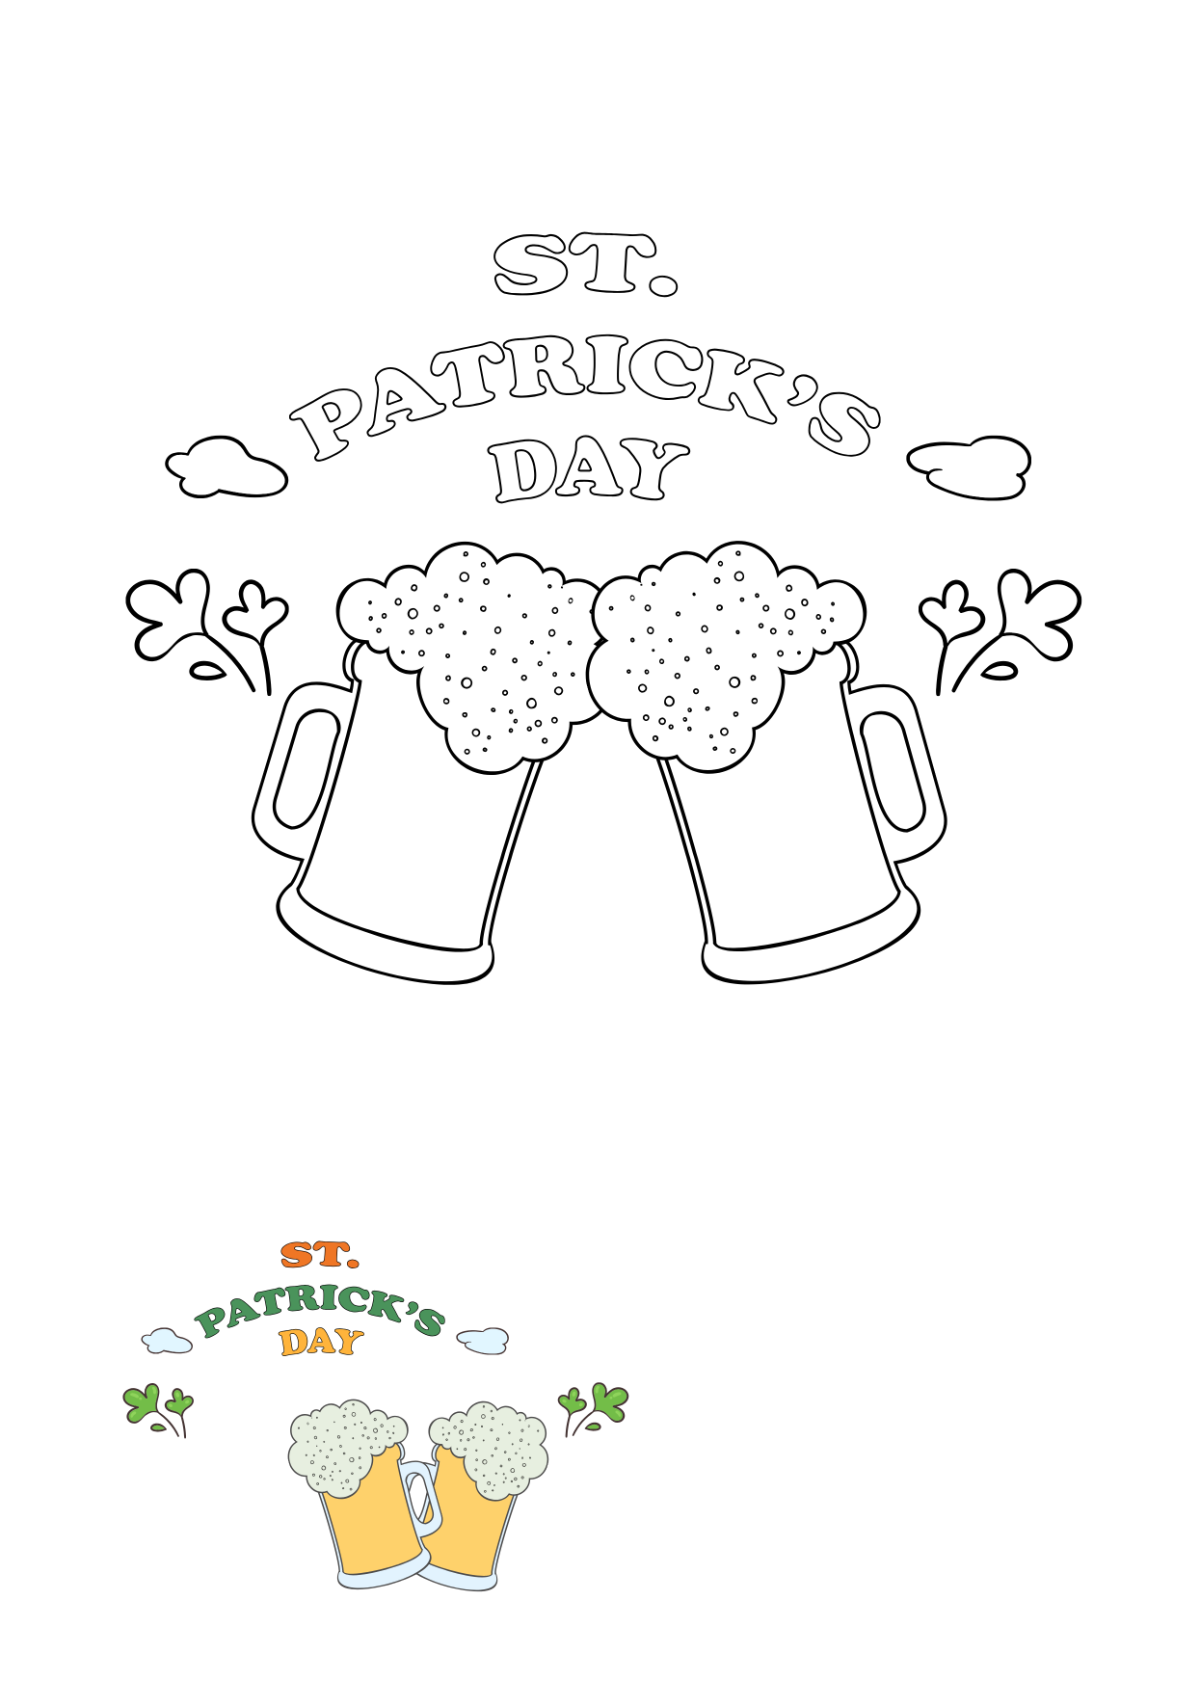 Simple St. Patrick’s Day Coloring Page Template